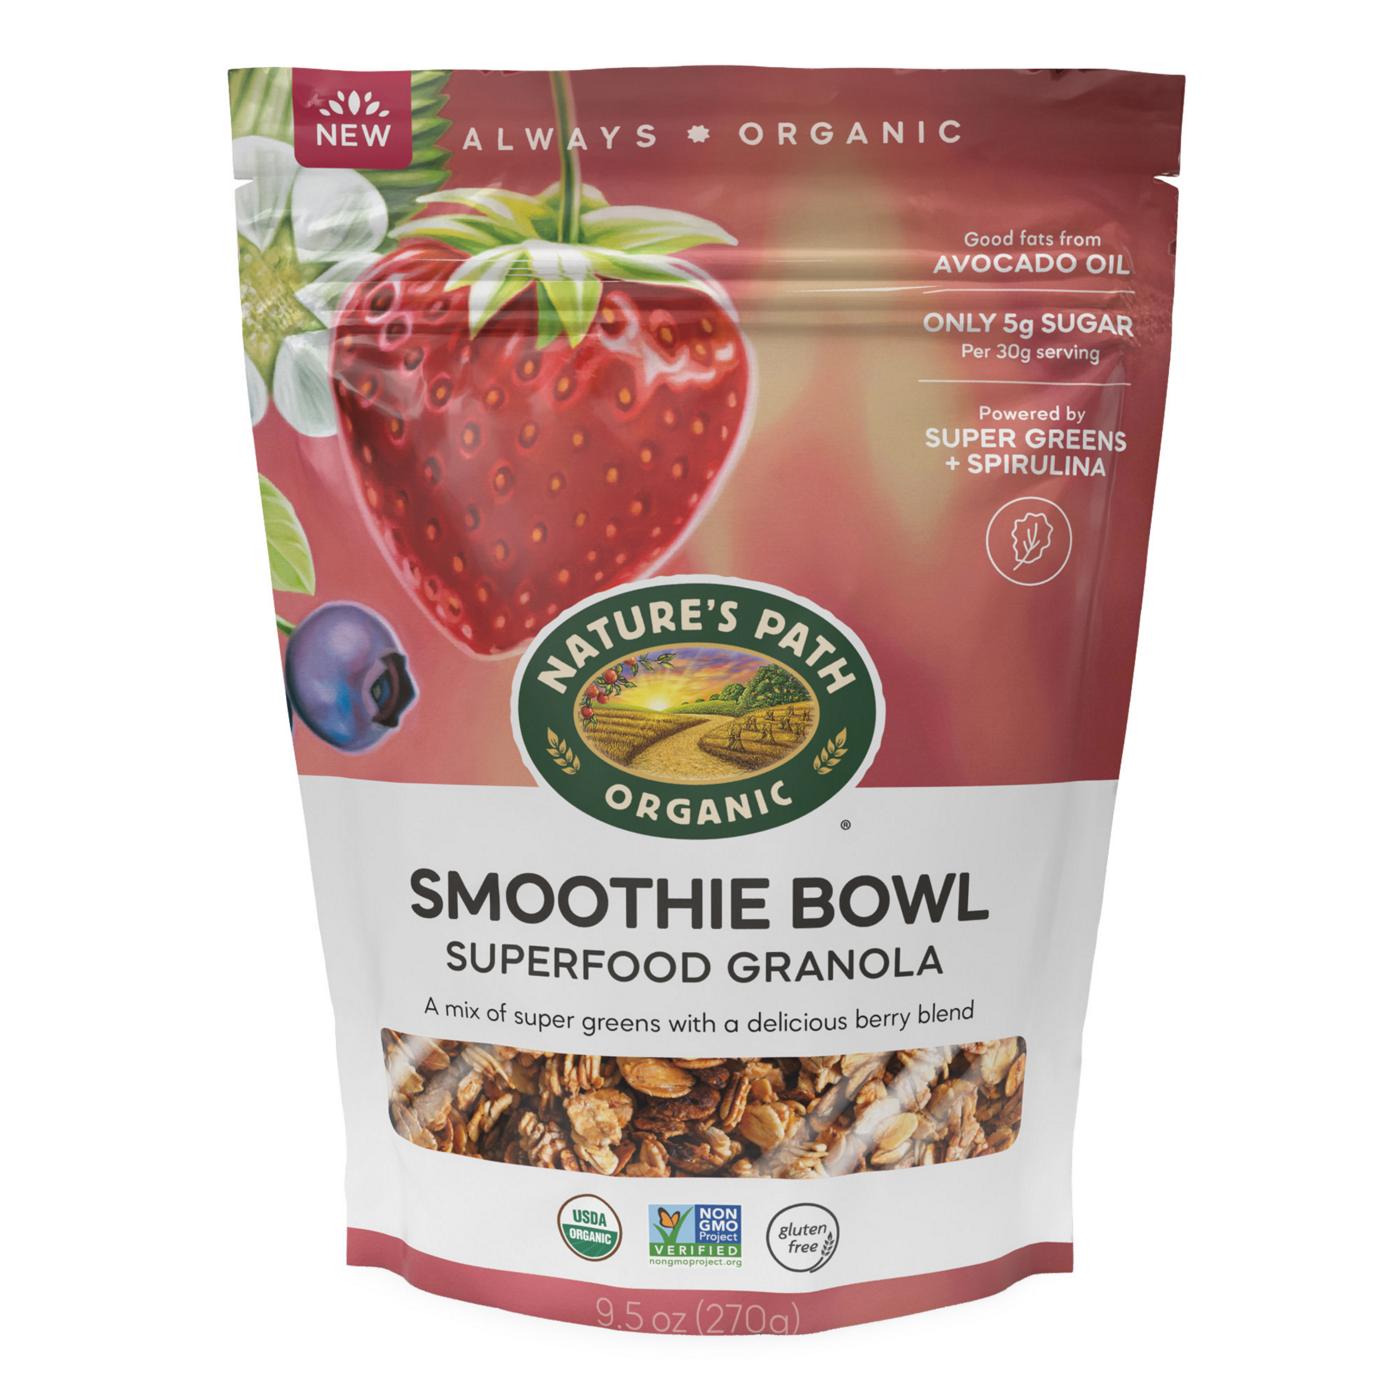 Nature's Path Smoothie Bowl Superfood Granola; image 1 of 5